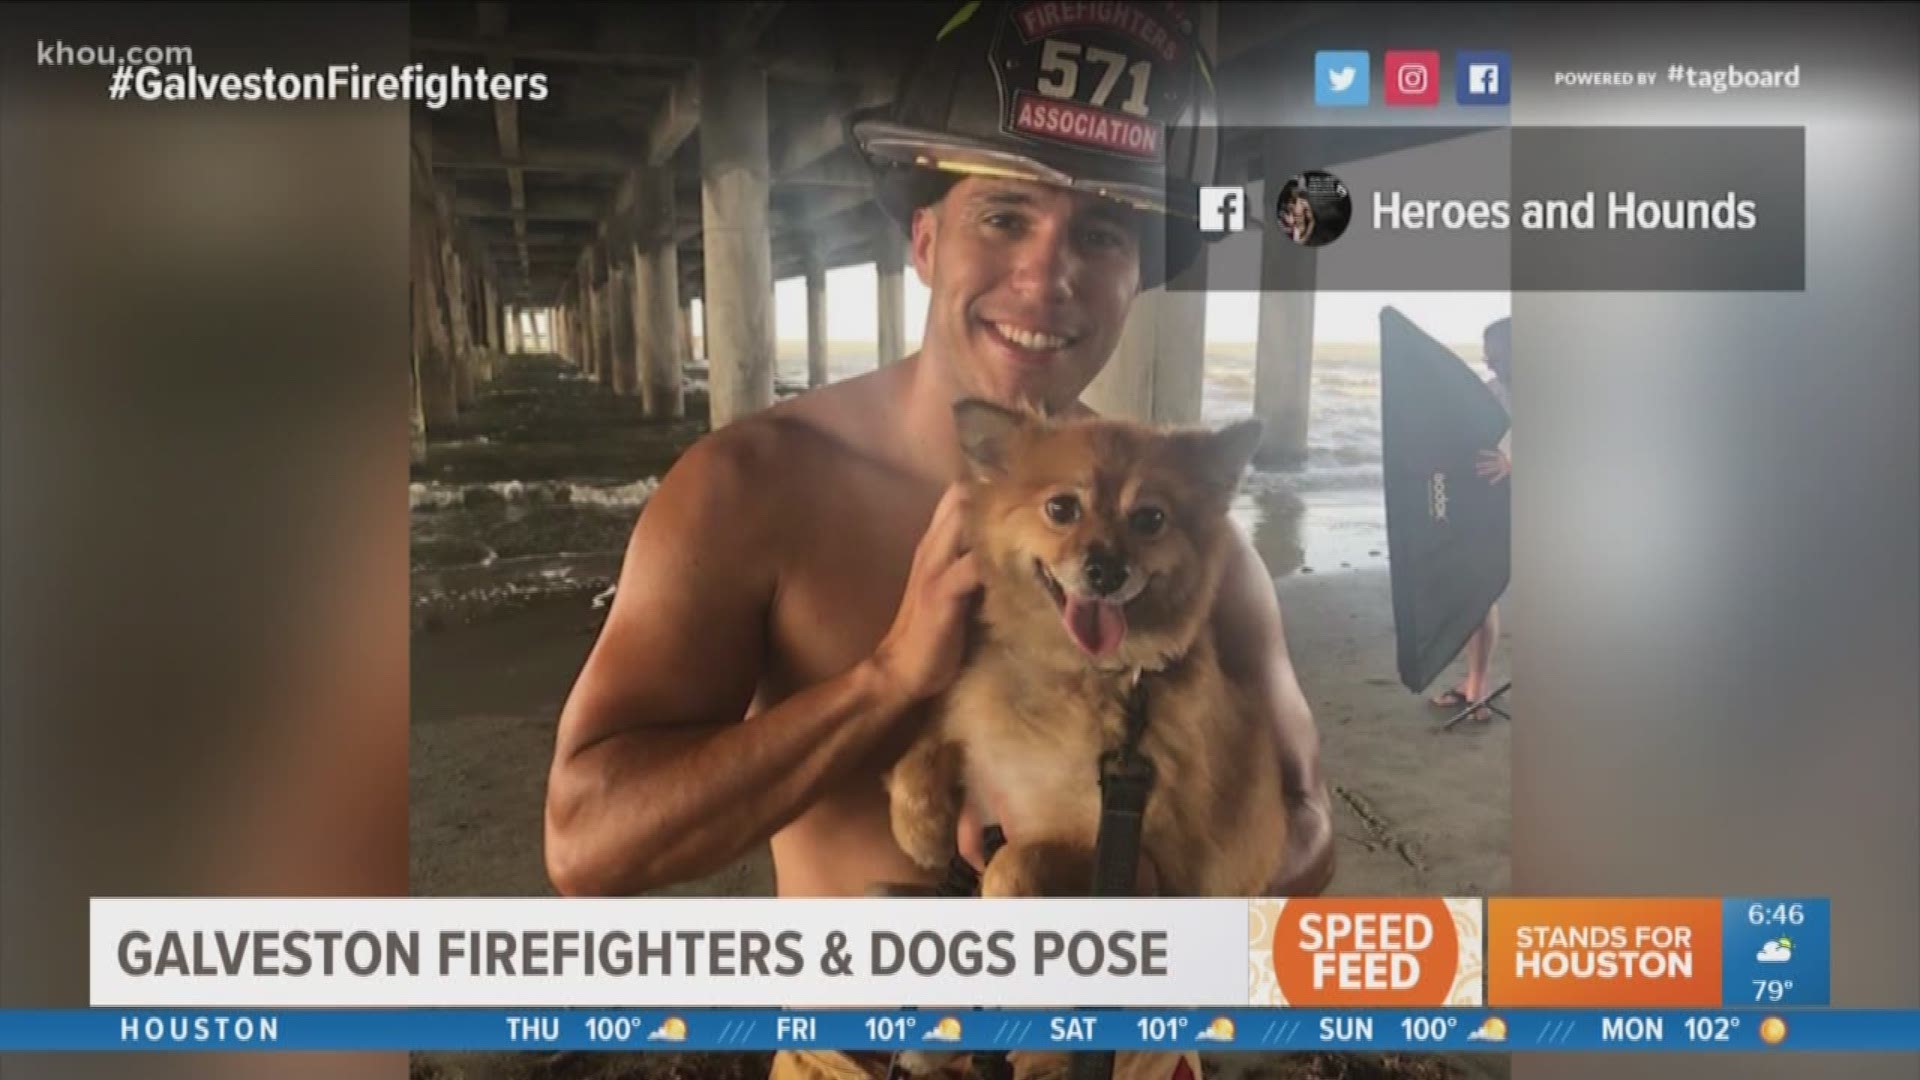 SPEED FEED: KHOU 11 News Anchor Lisa Hernandez shares photos from the Galveston Heroes and Hounds Calendar 